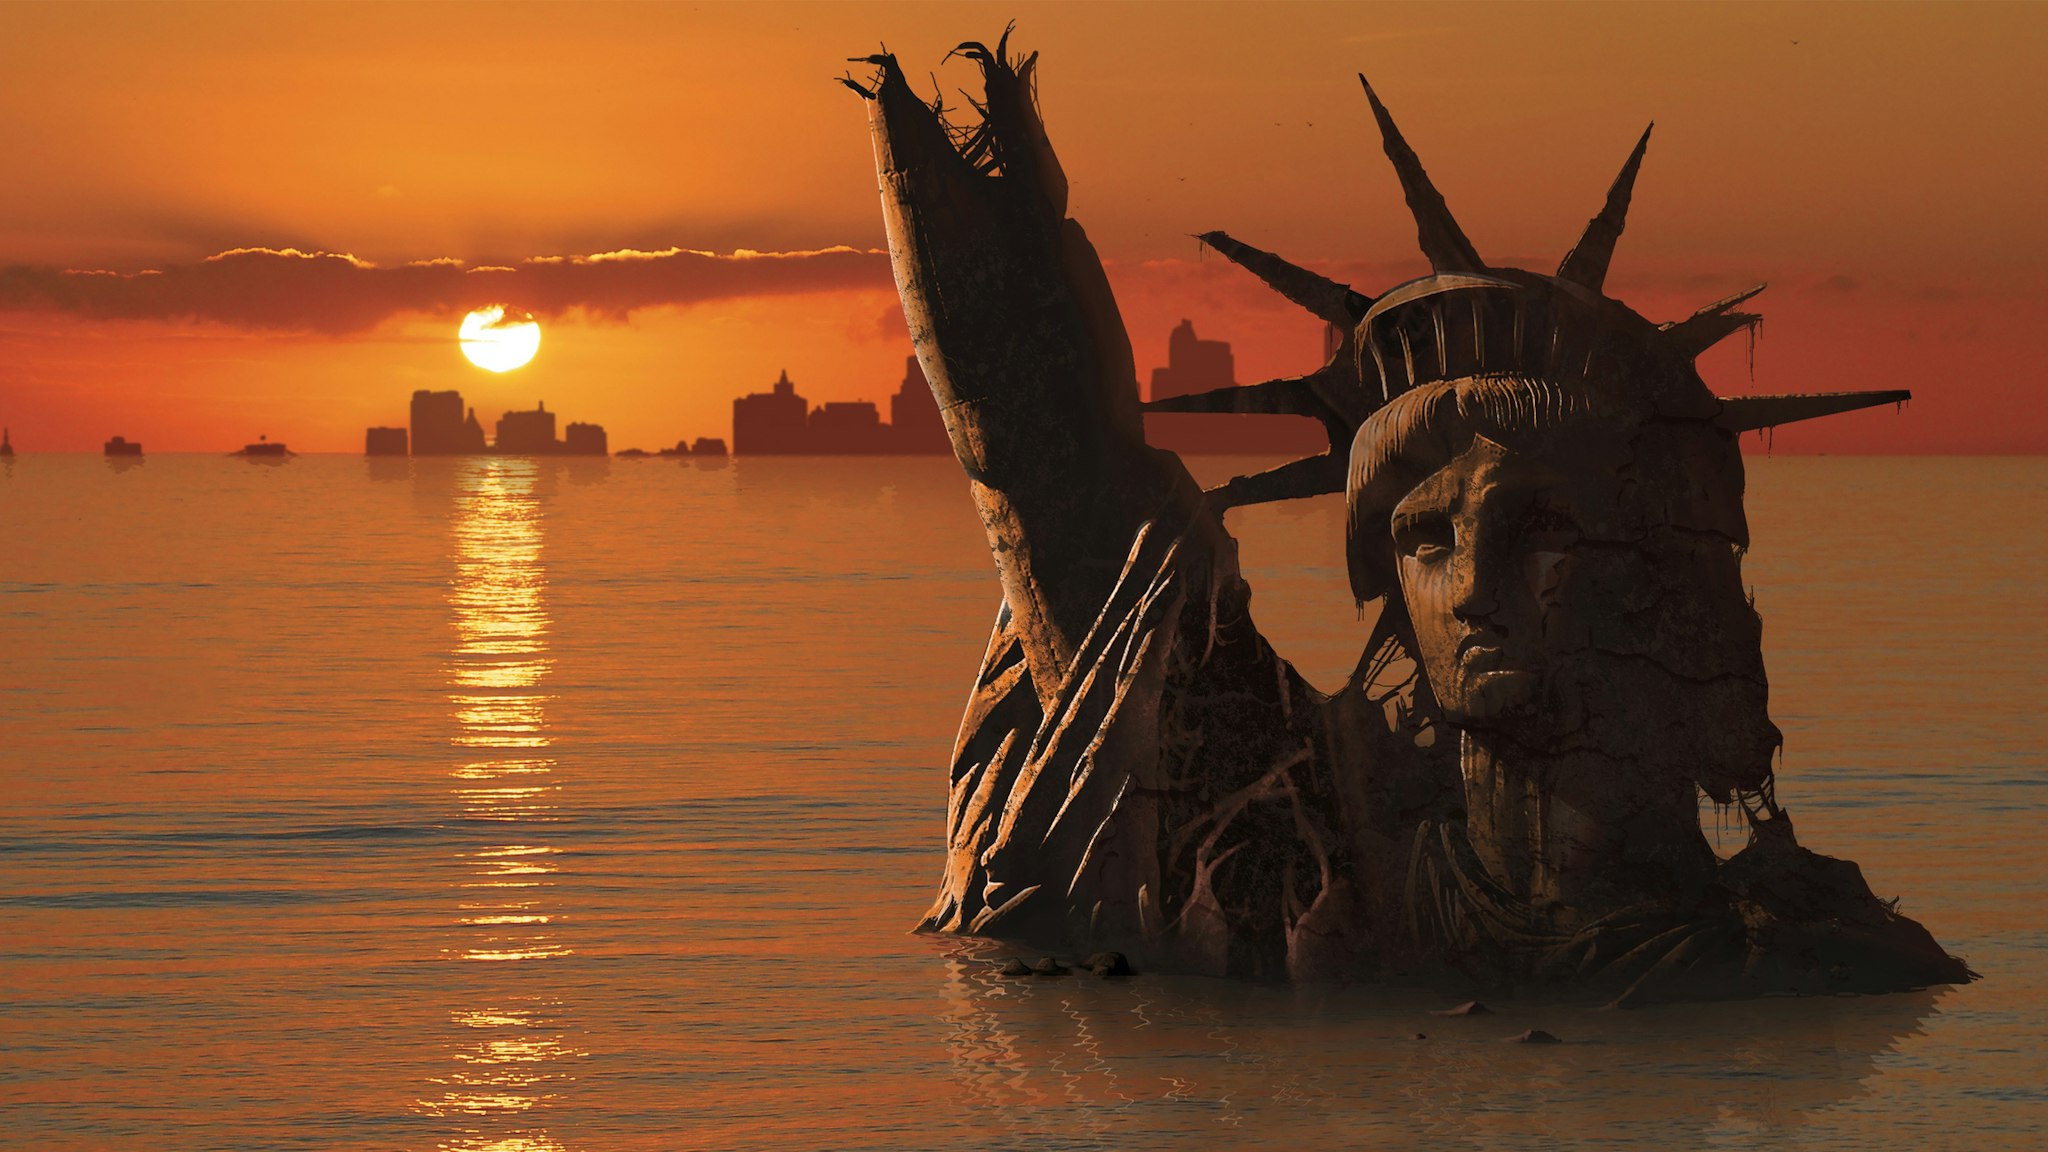 Global warming, conceptual computer illustration. Statue of Liberty, New York, USA, flooded and in ruins, in a possible future. This is showing a rise in sea levels due to global warming. Global warming is the increase of average temperature of the Earth's atmosphere and oceans. The melting of ice and glaciers contribute to the rise in sea levels. MARK GARLICK/SCIENCE PHOTO LIBRARY. Getty Images.